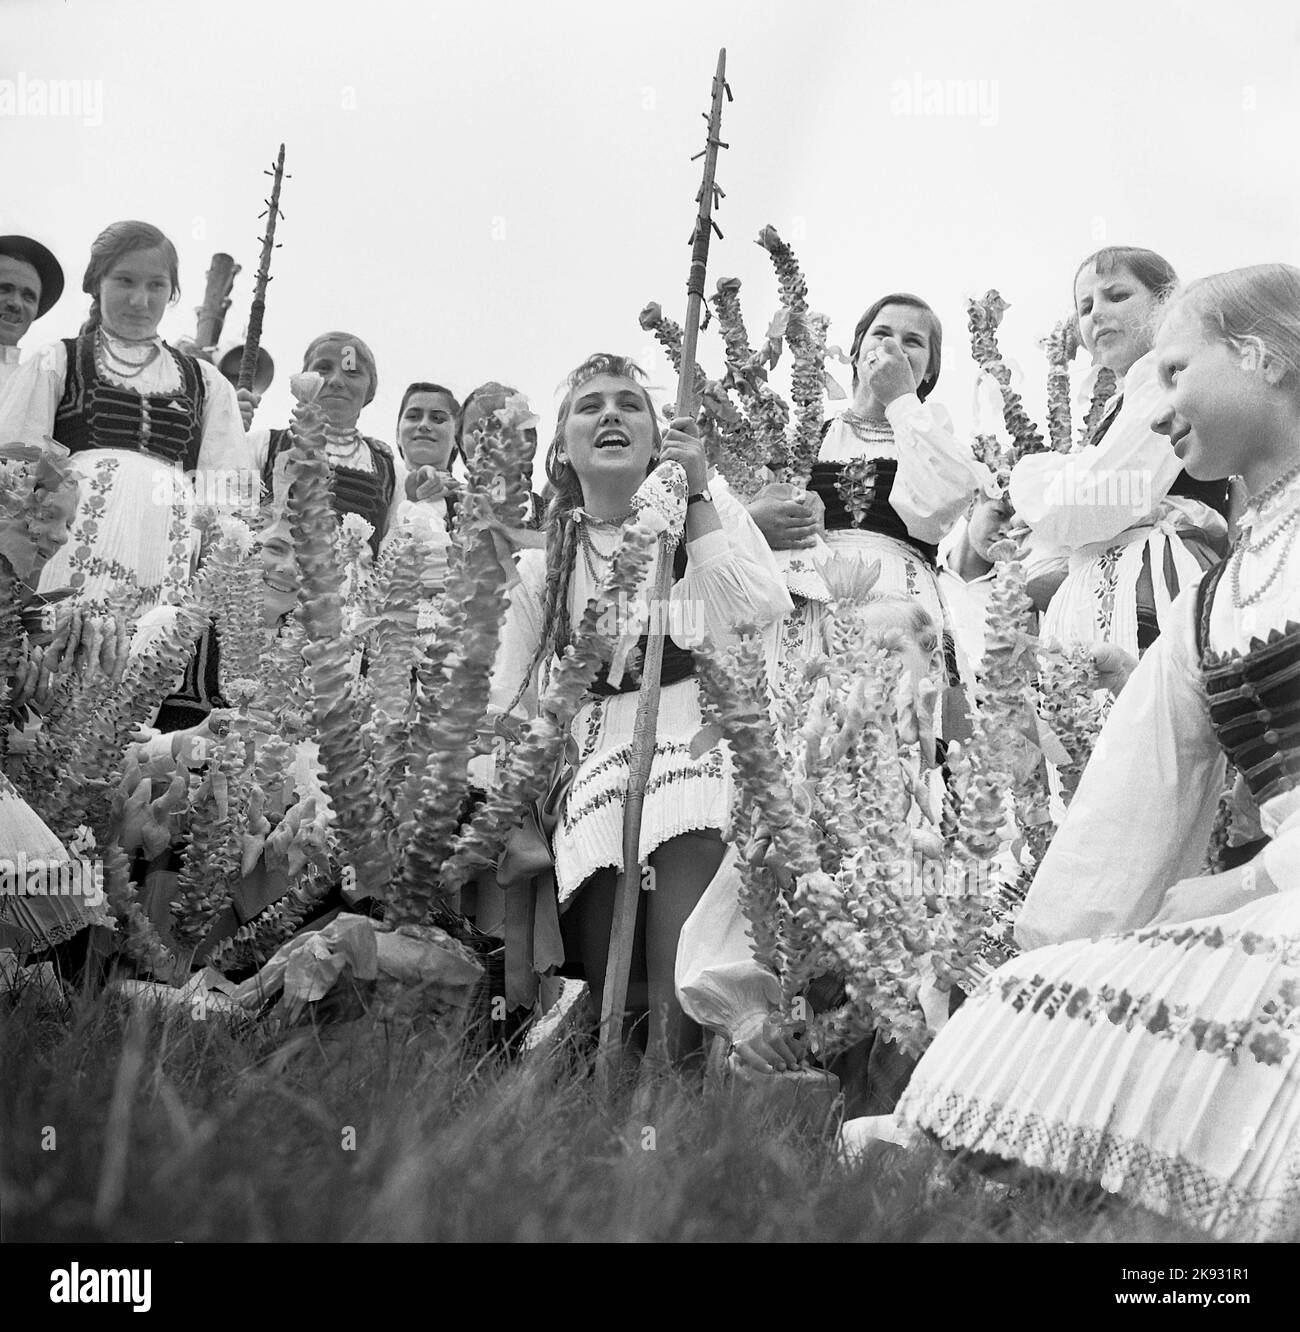 Covasna County, Romania, approx. 1974. Hungarian ethnics wearing their folk costumes celebrating 'Farsang' with the traditional doughnuts. Stock Photo